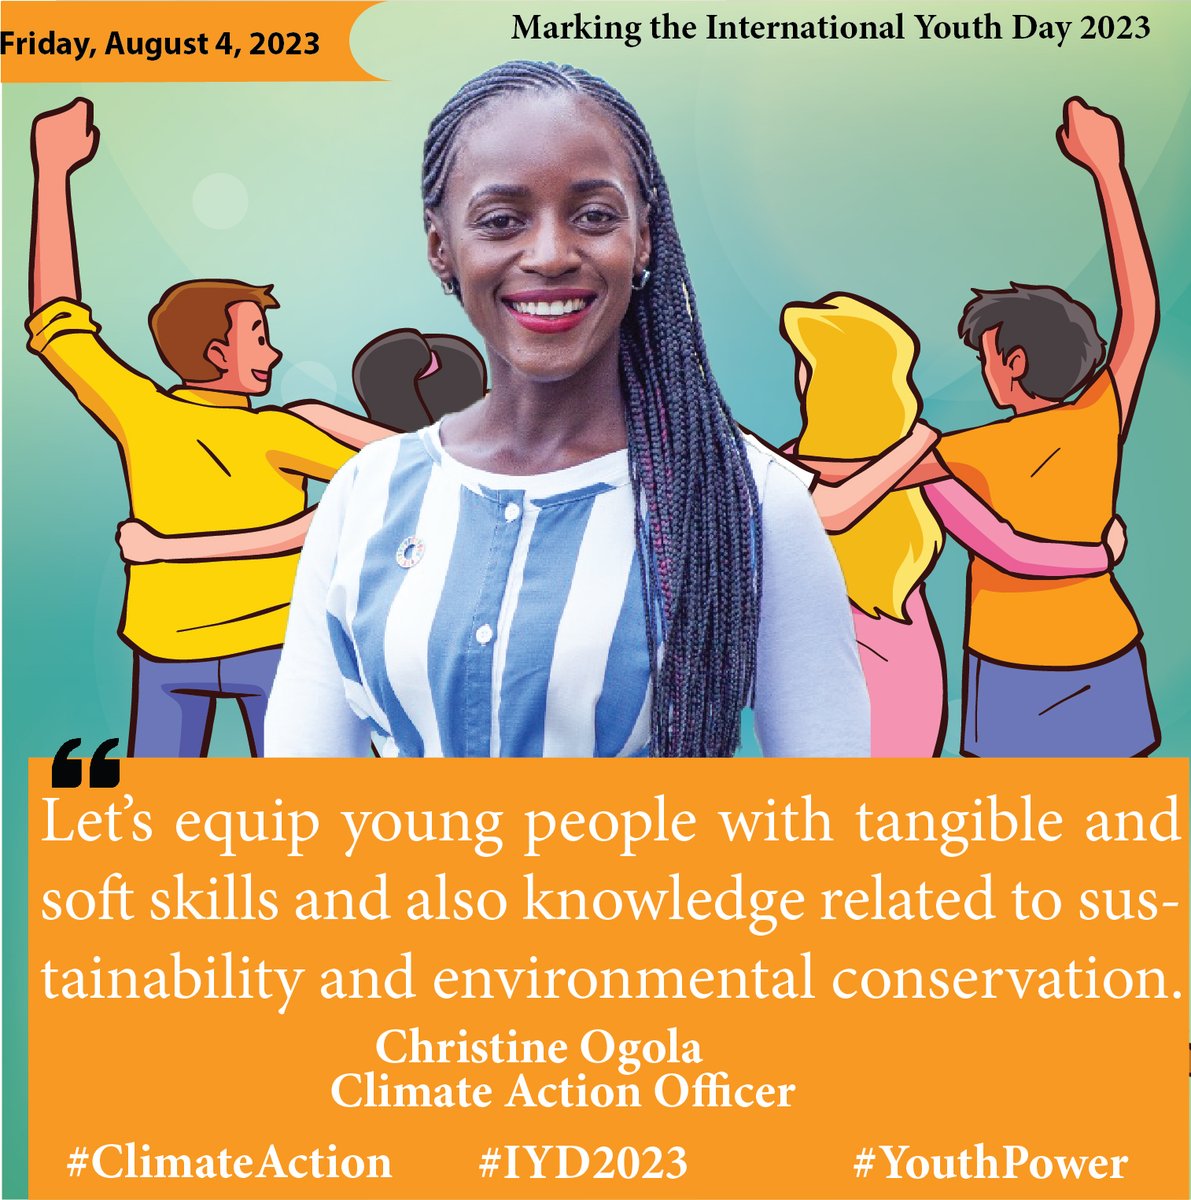 Let’s equip young people with tangible and soft skills and also knowledge related to sustainability and environmental conservation.- @ChristineOgola